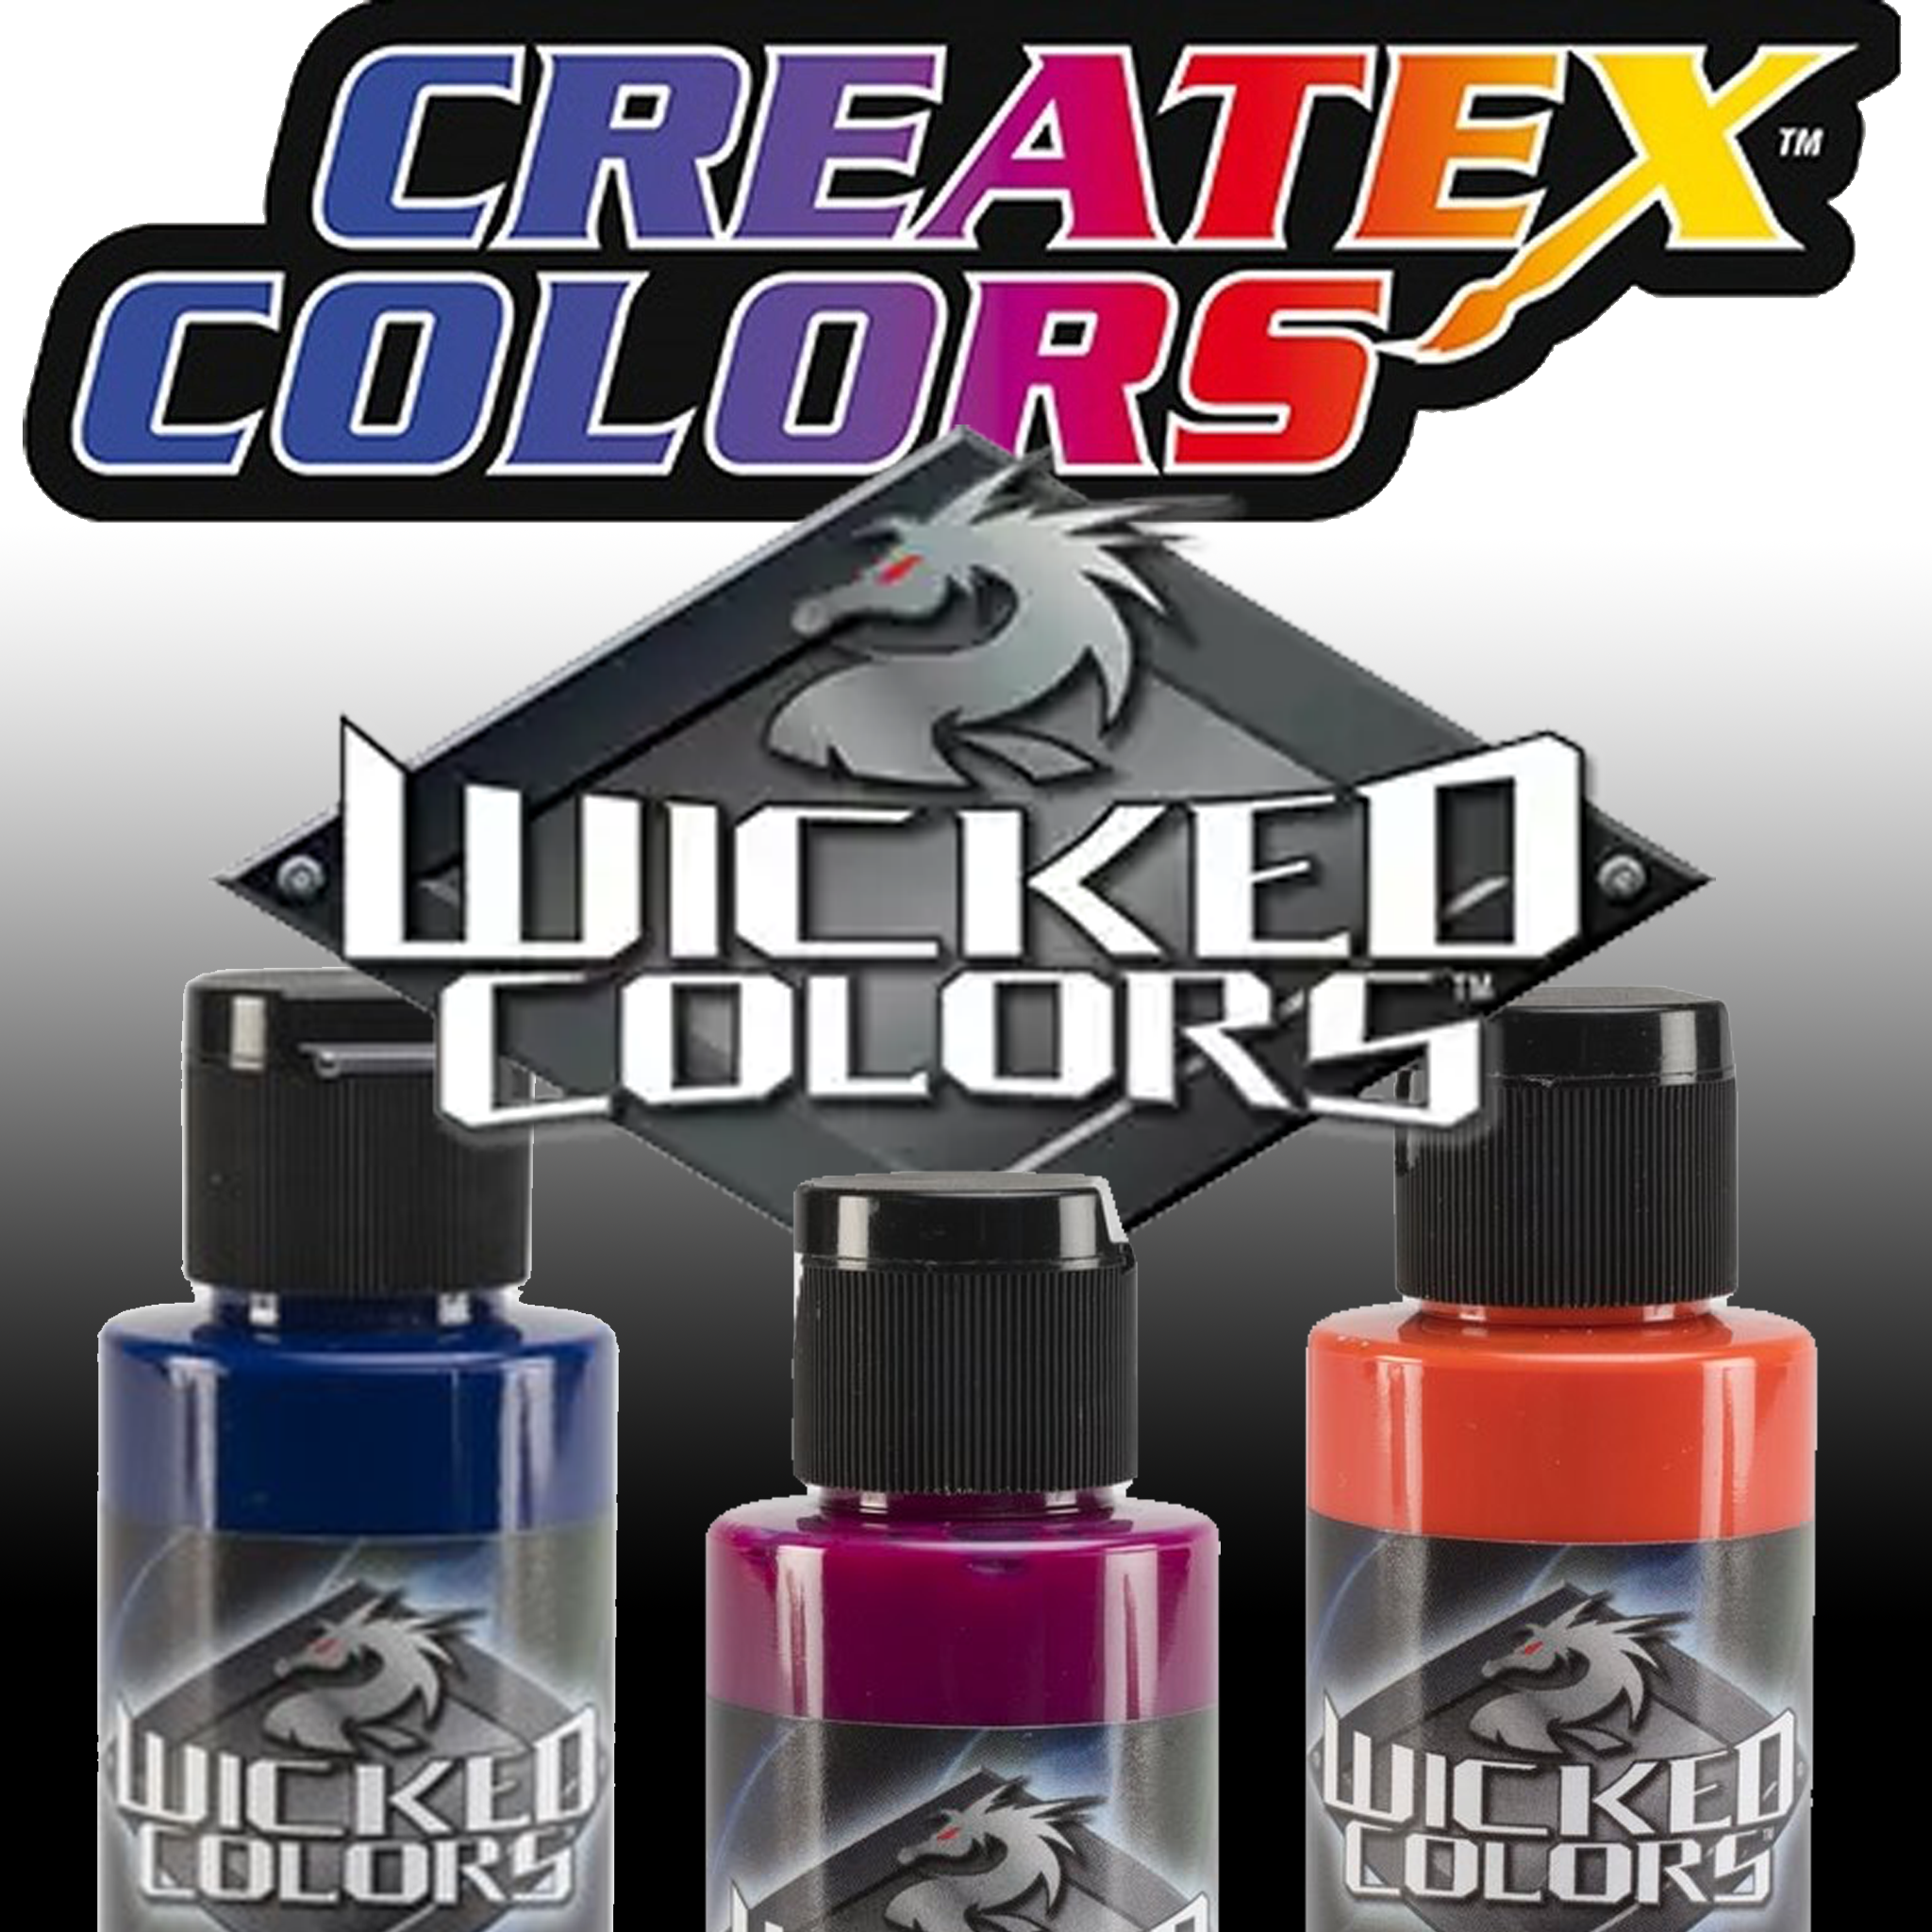 5620  Additives, Reducers and Cleaners by Createx Colors